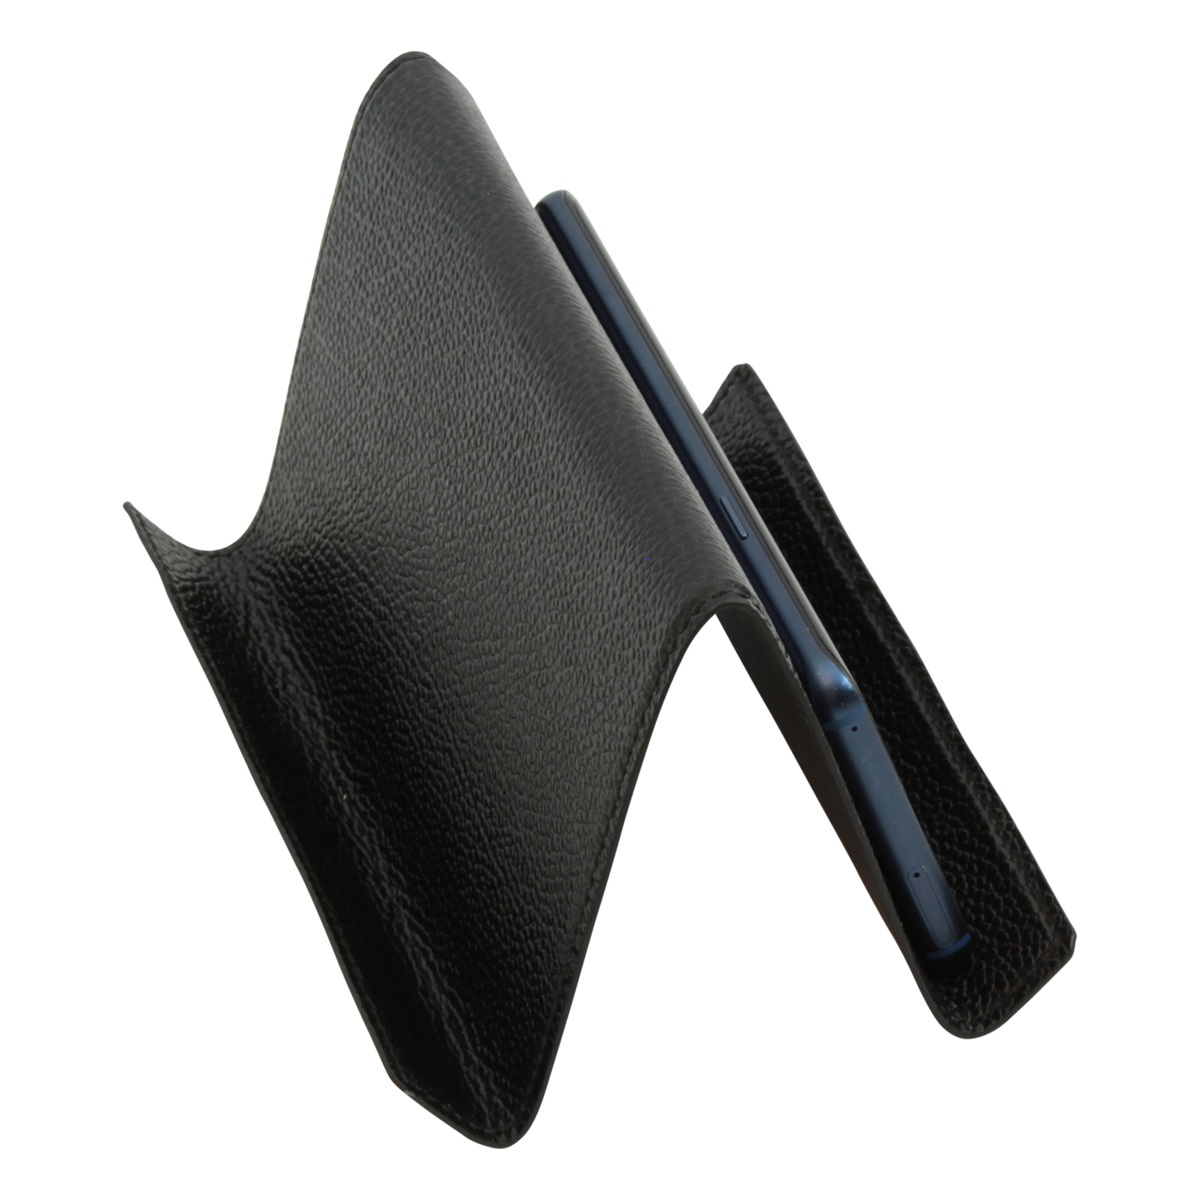 Leather ipad and iphone stand - black | 764051NE UK | Old Angler Firenze